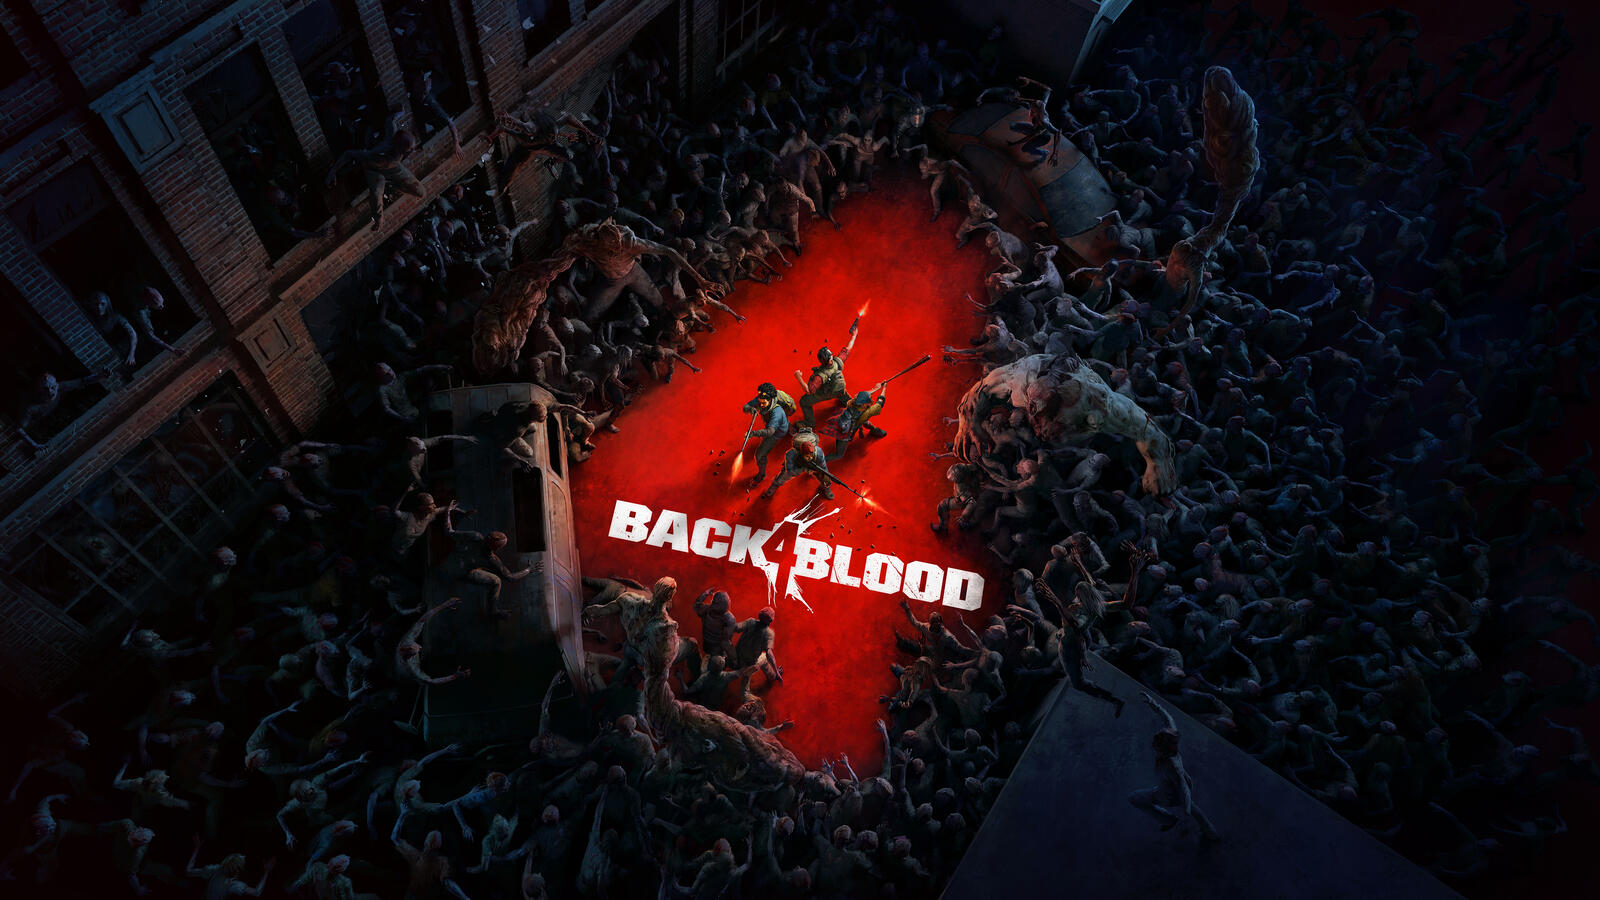 Wallpapers back 4 blood games PS4 games on the desktop